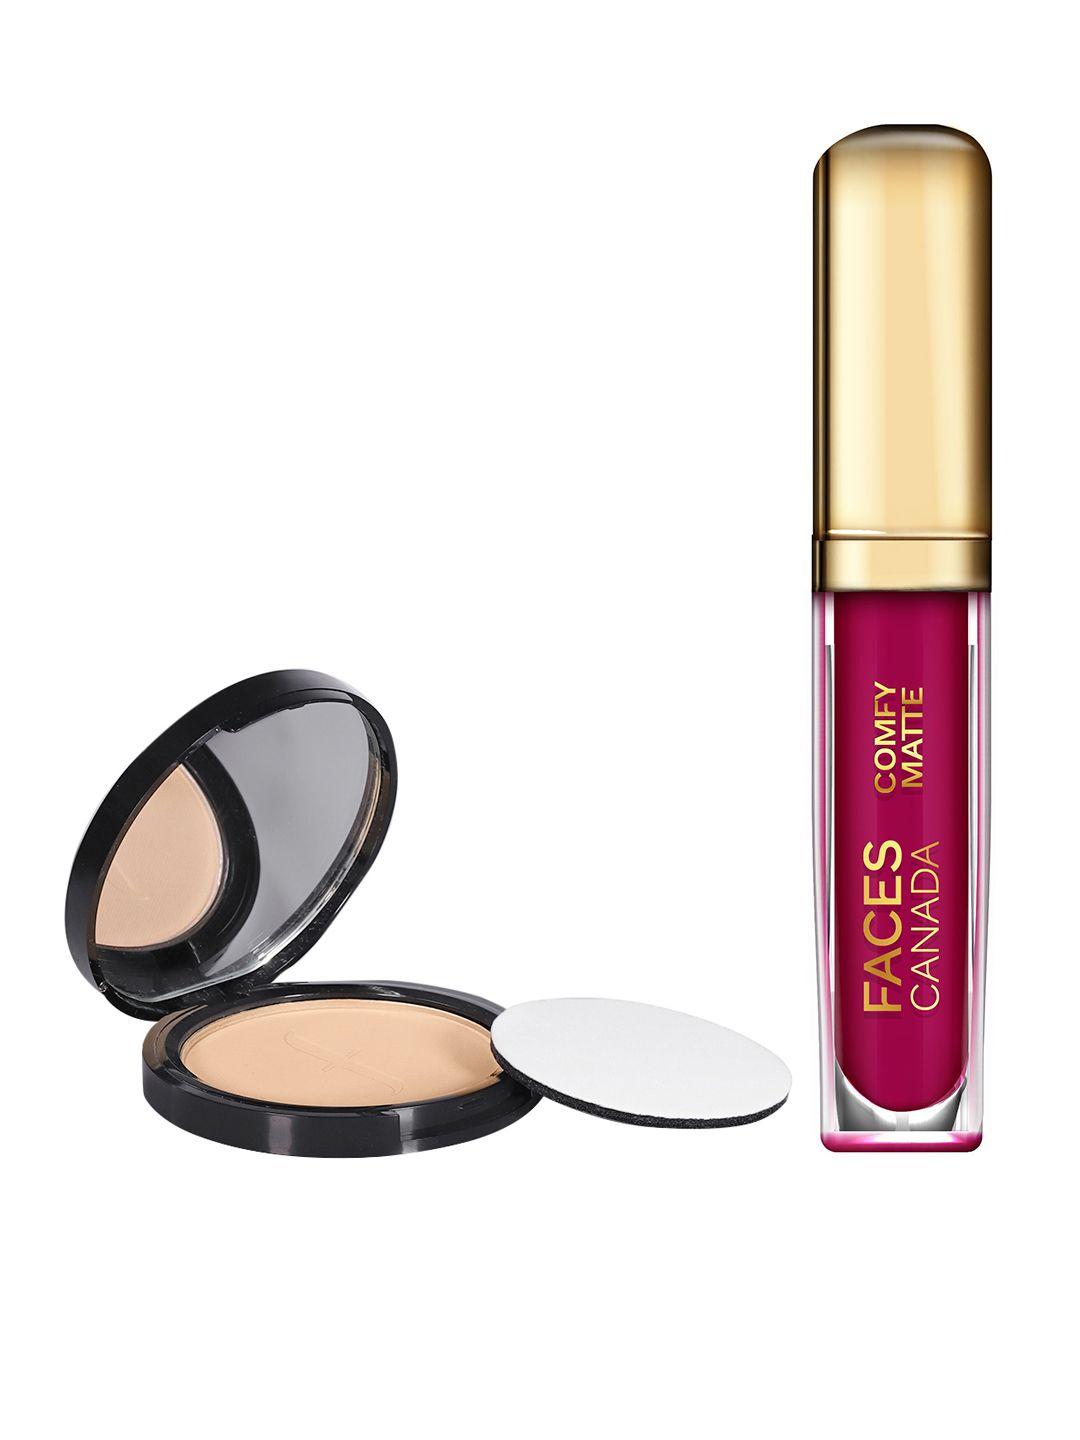 faces canada set of matte compact - natural02 & comfy matte lip color - getting ready02